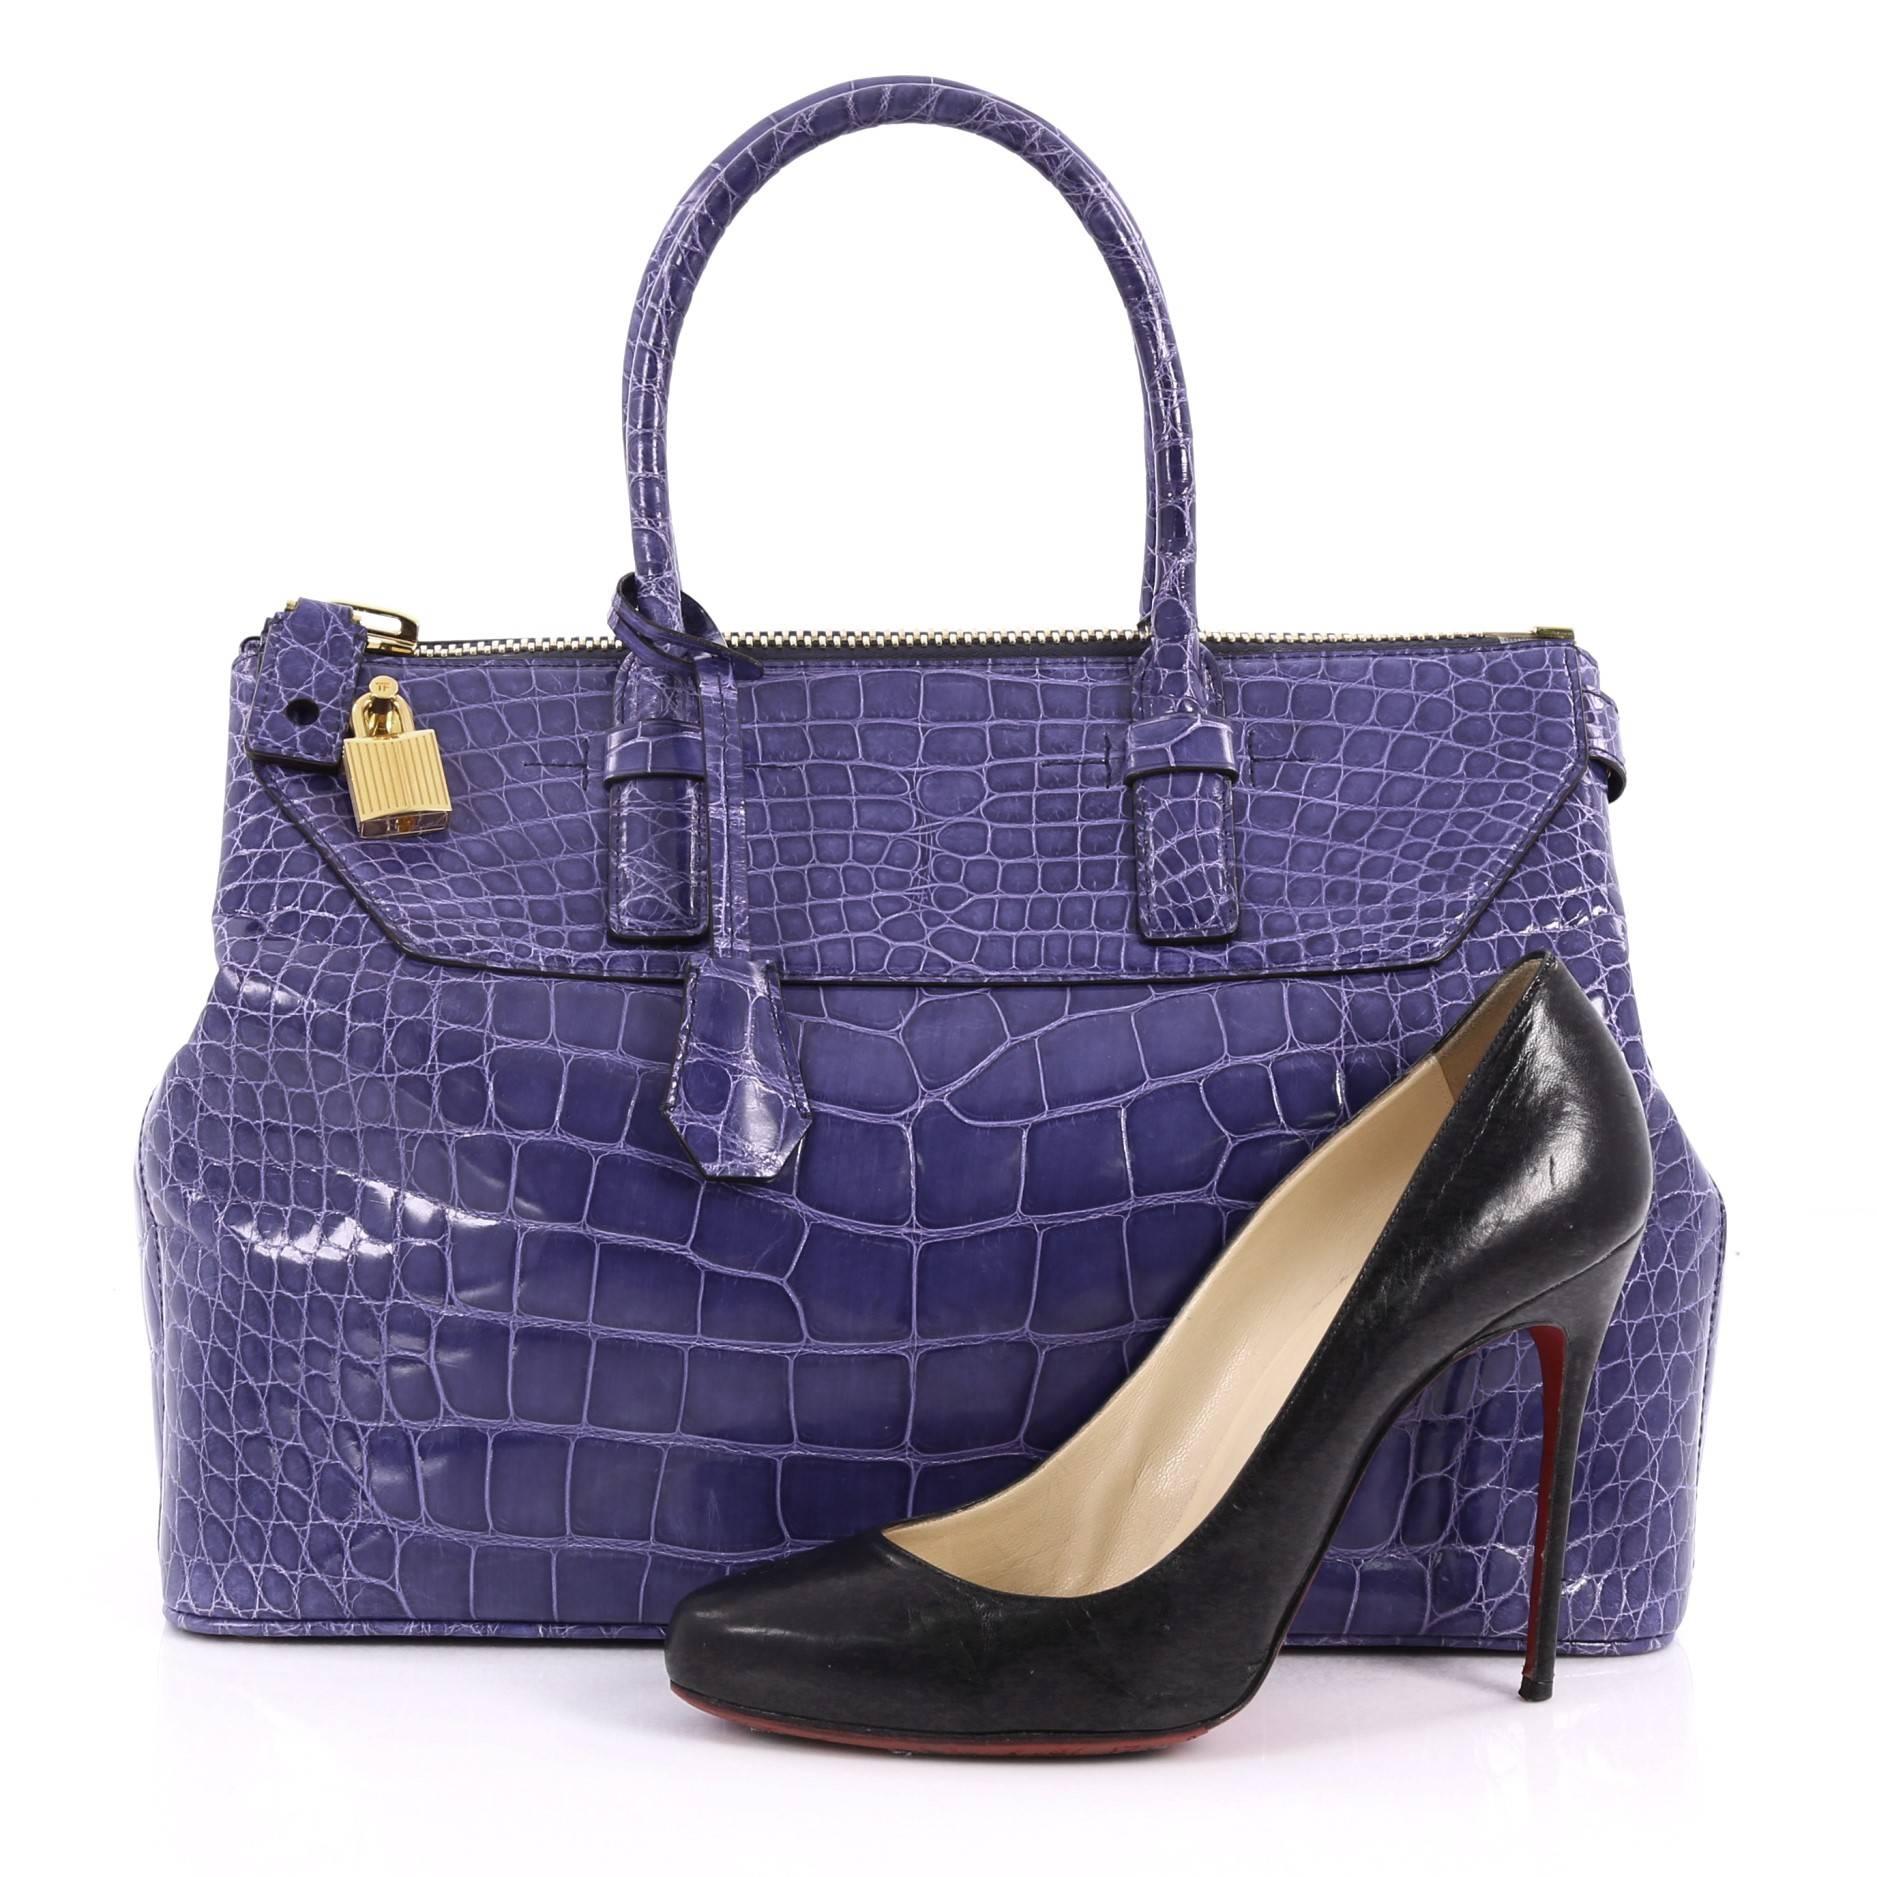 This authentic Tom Ford Petra Tote Crocodile Medium is ideal for everyday casual looks or business excursions. Crafted in genuine purple crocodile, this minimalist yet stylish tote features tall dual-rolled handles, protective base studs, lock